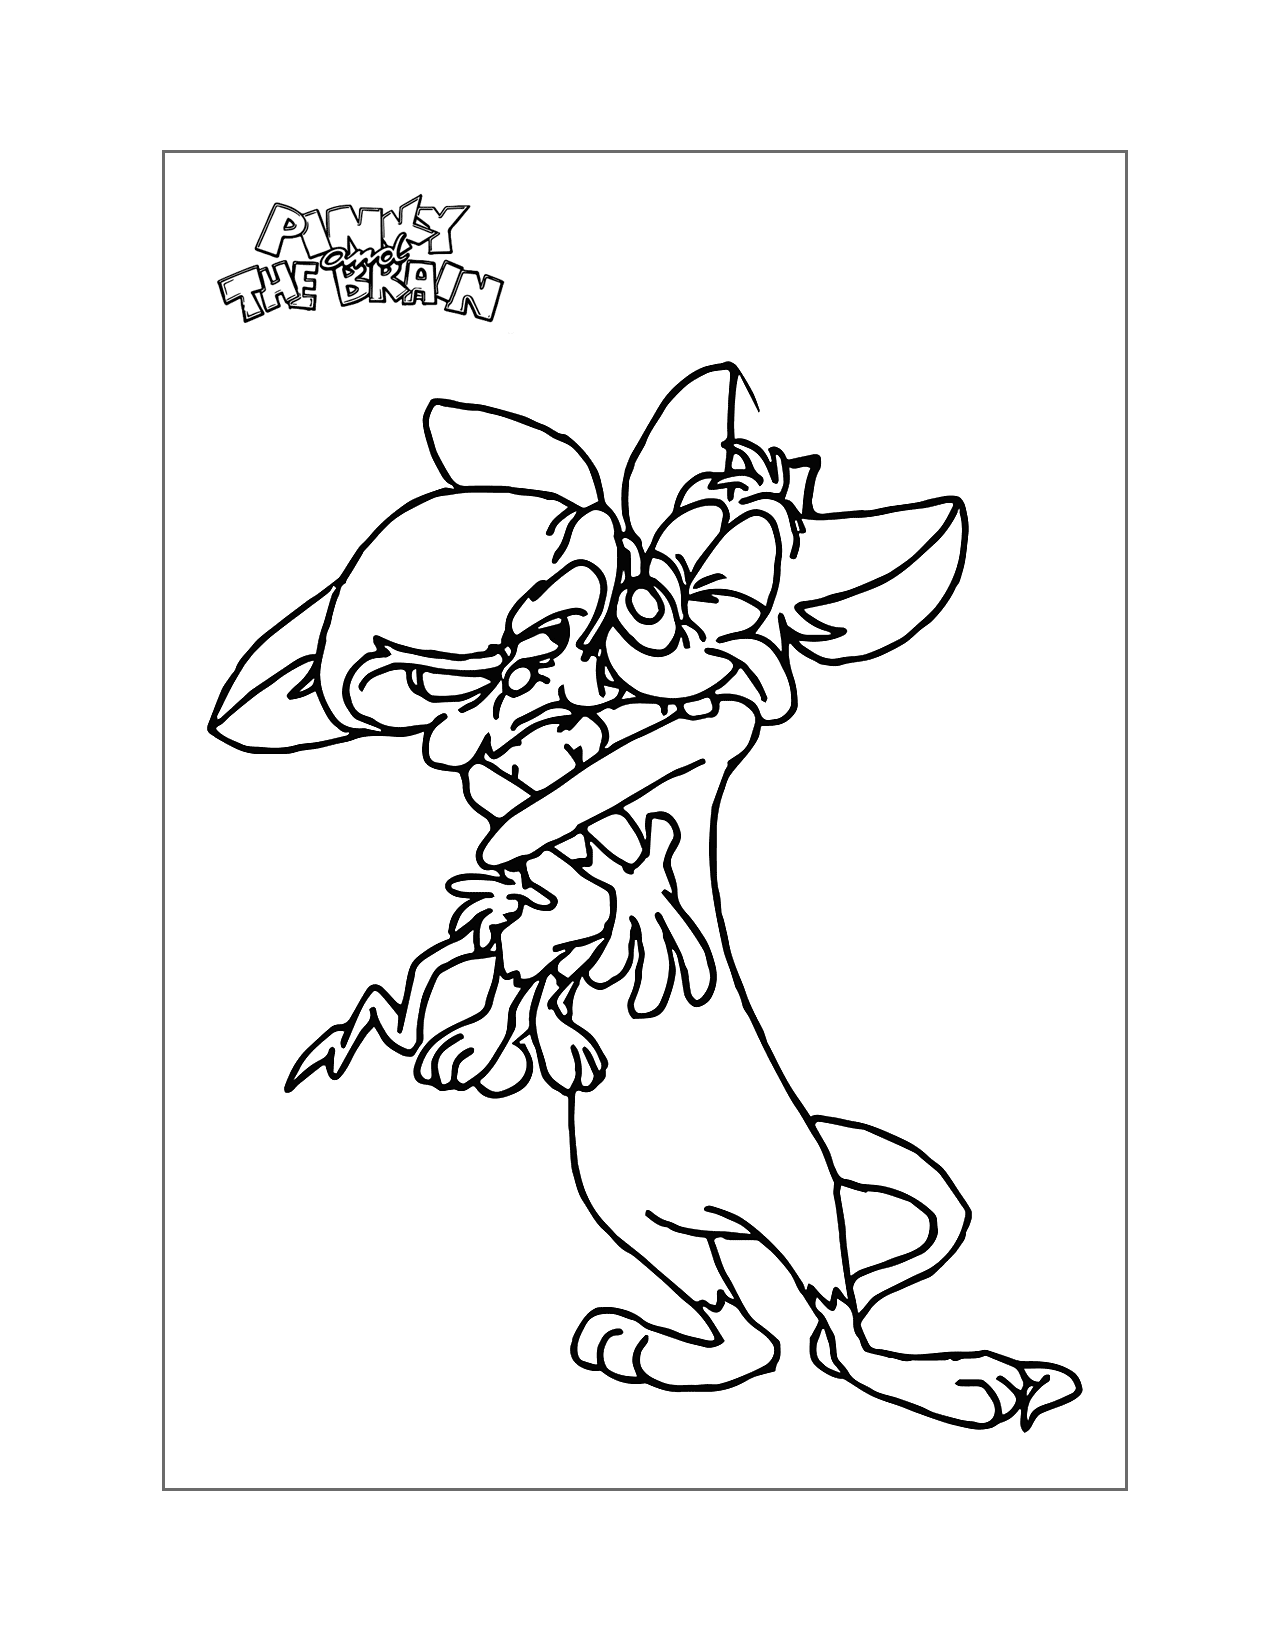 Pinky Hugging Brain Coloring Page